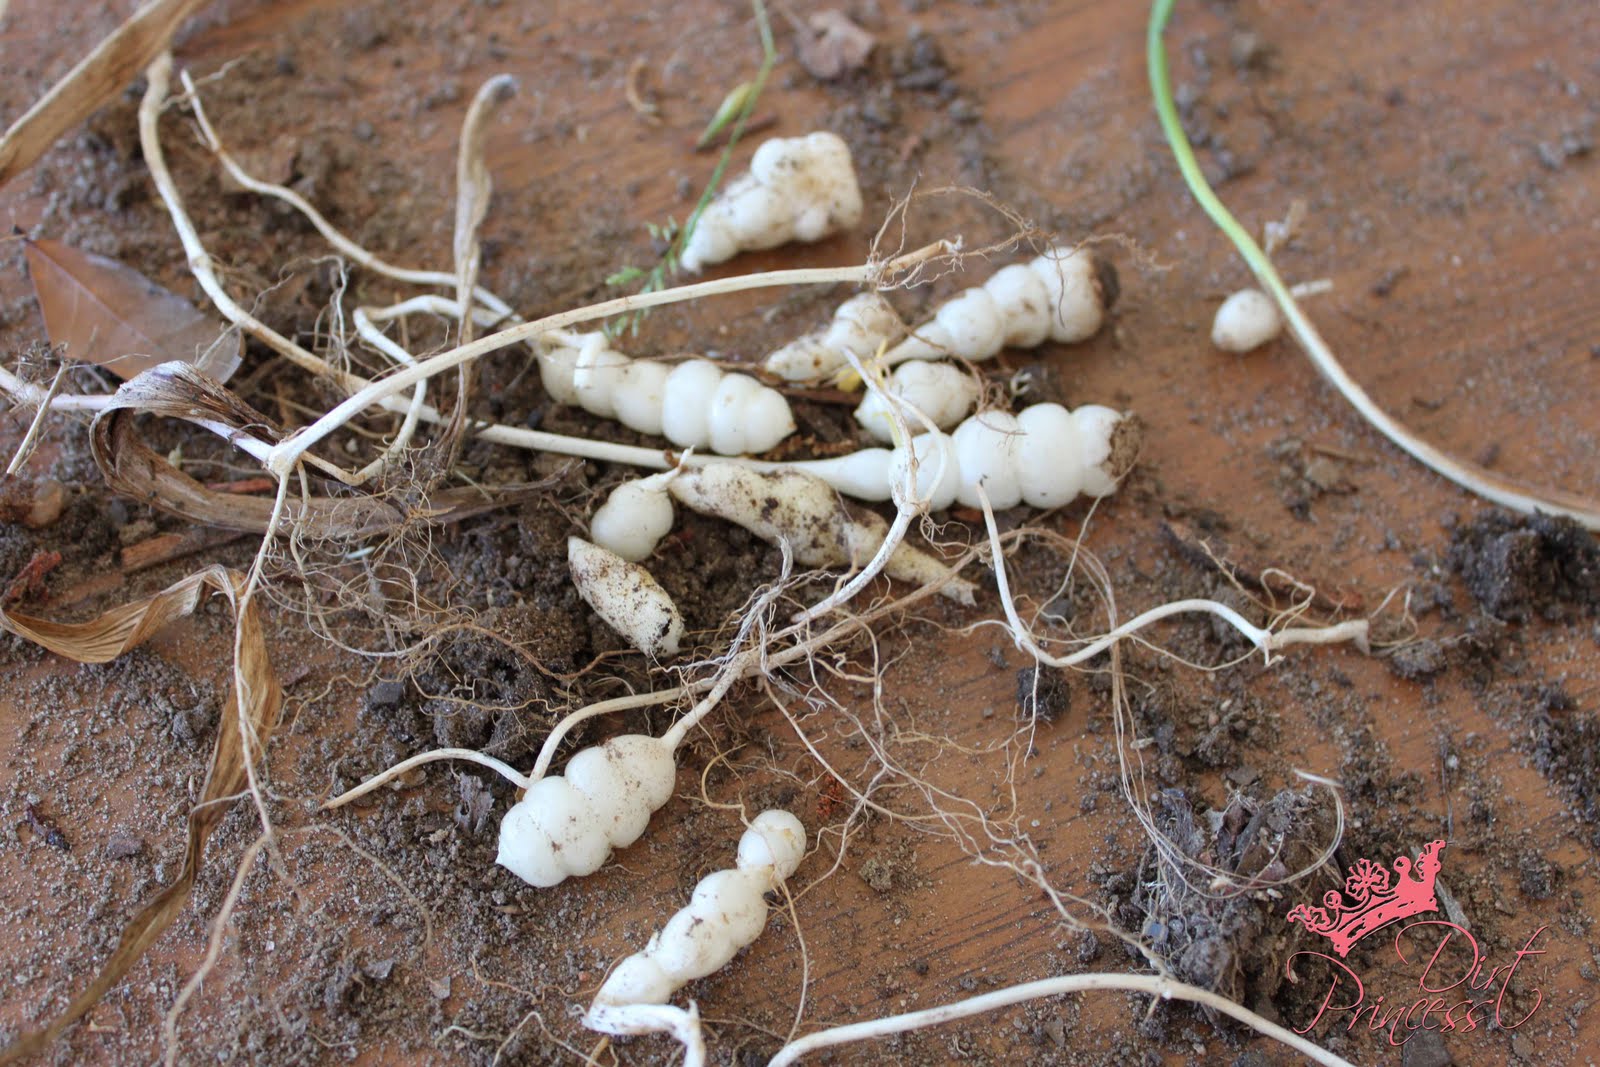 bulbs roots weed rattlesnake travel pulling off after april